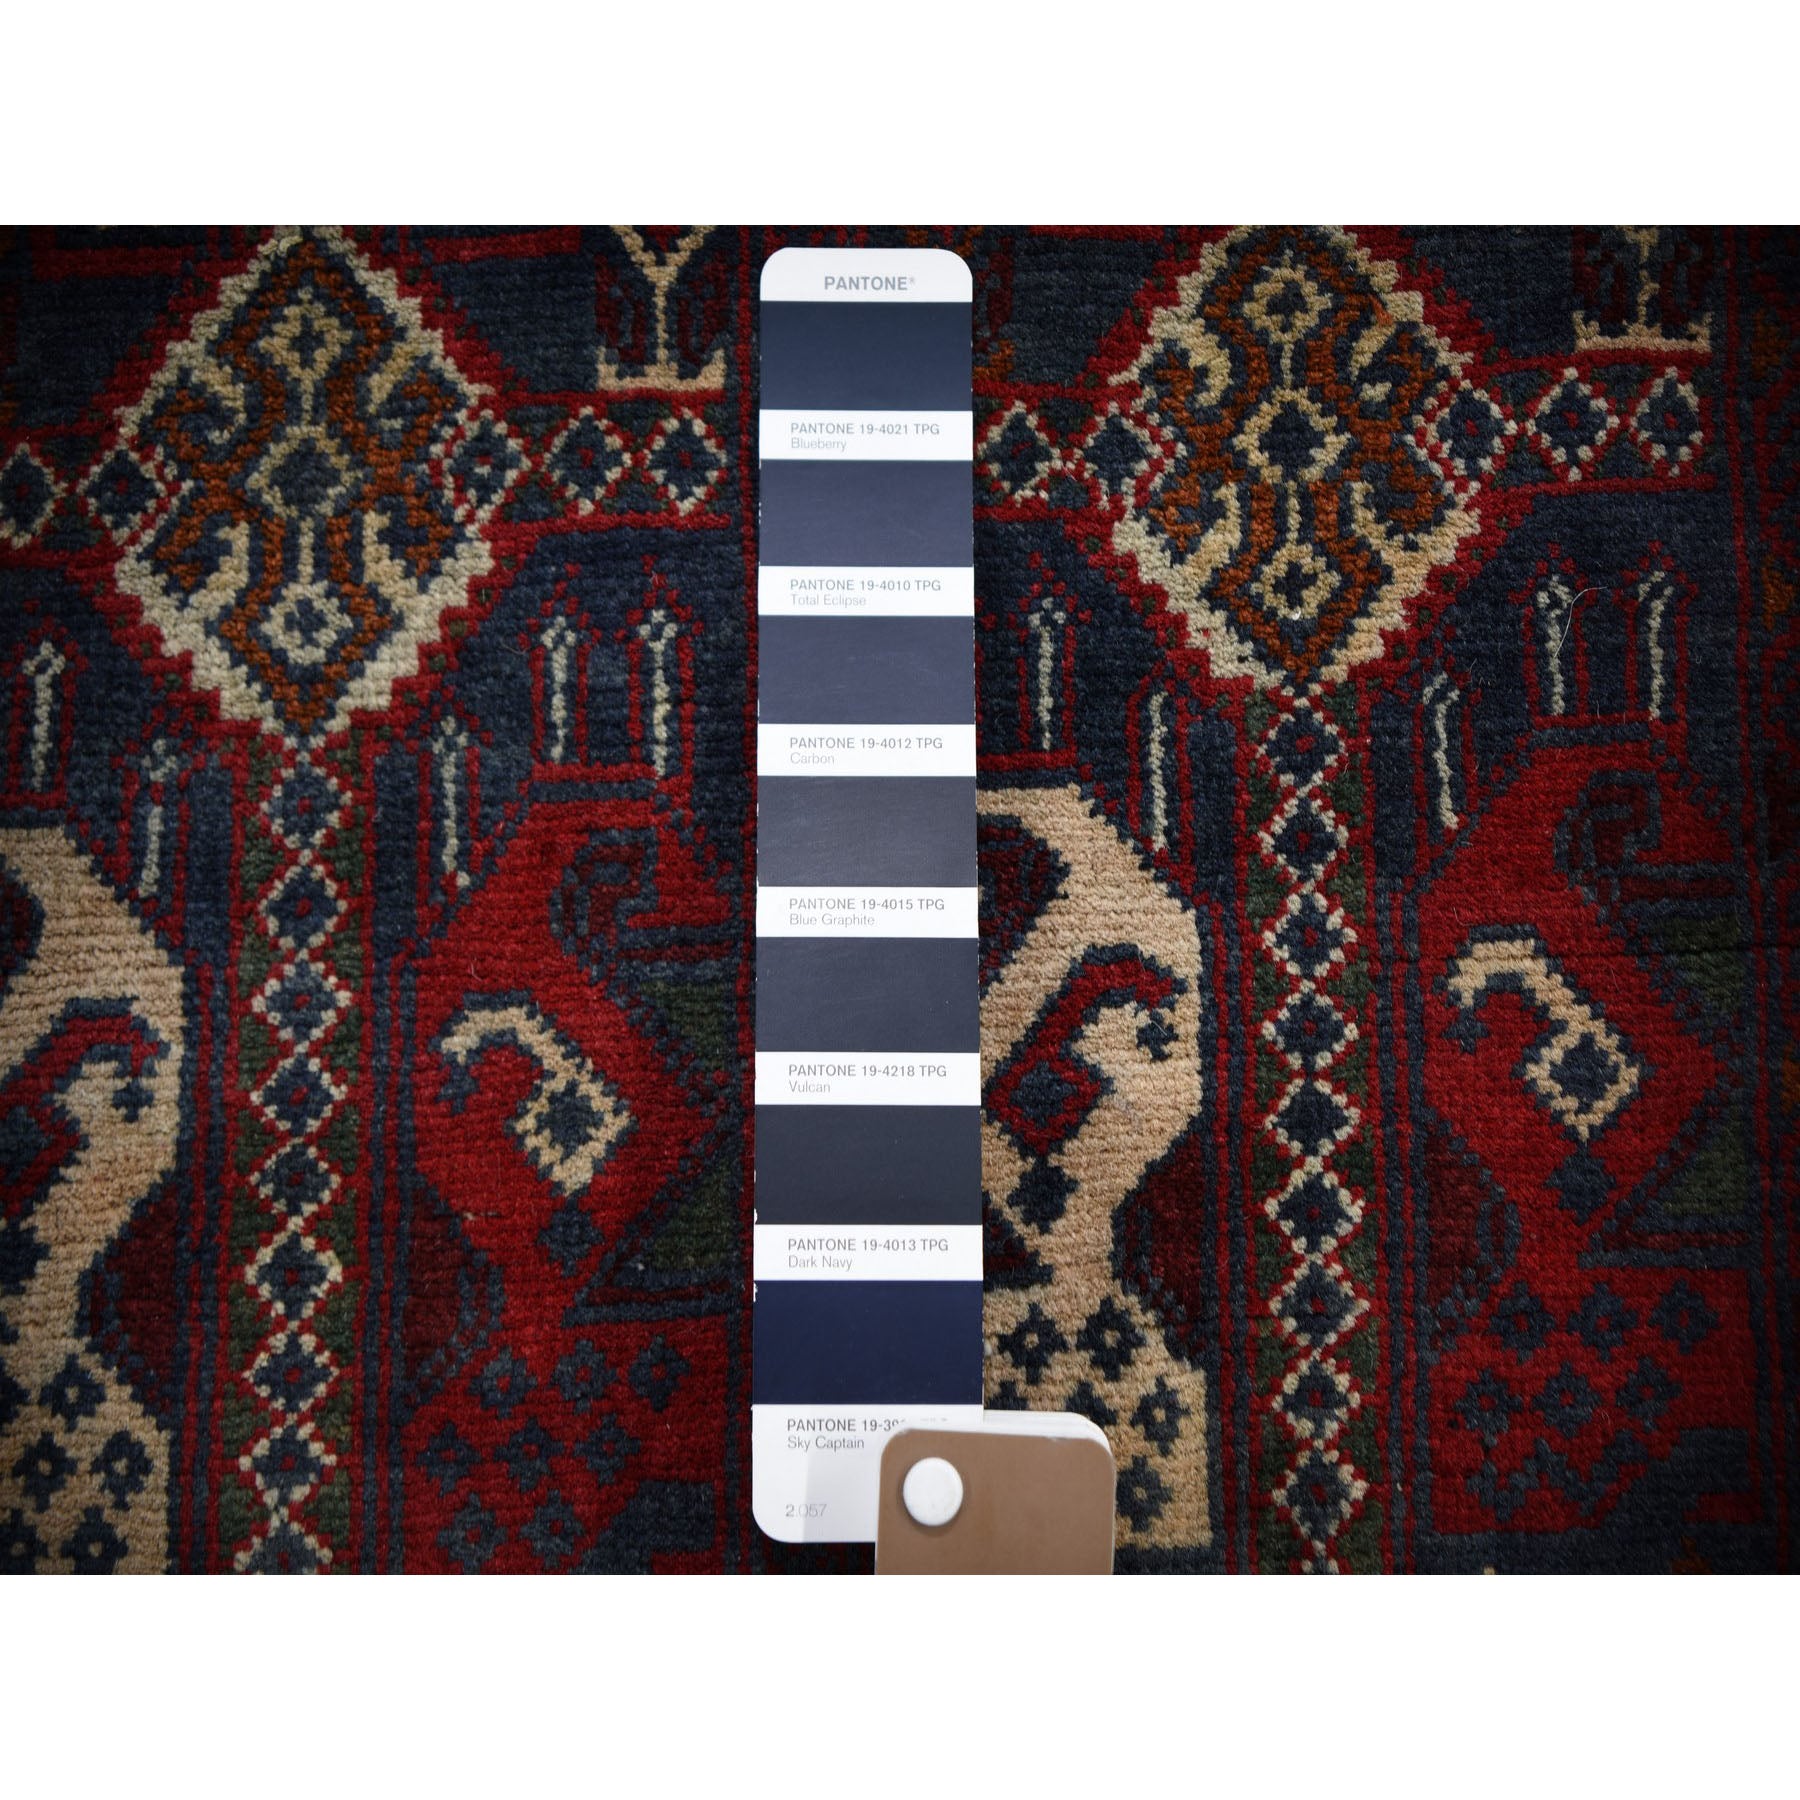 Hand Knotted Tribal Runner > Design# CCSR49820 > Size: 2'-6" x 9'-4"